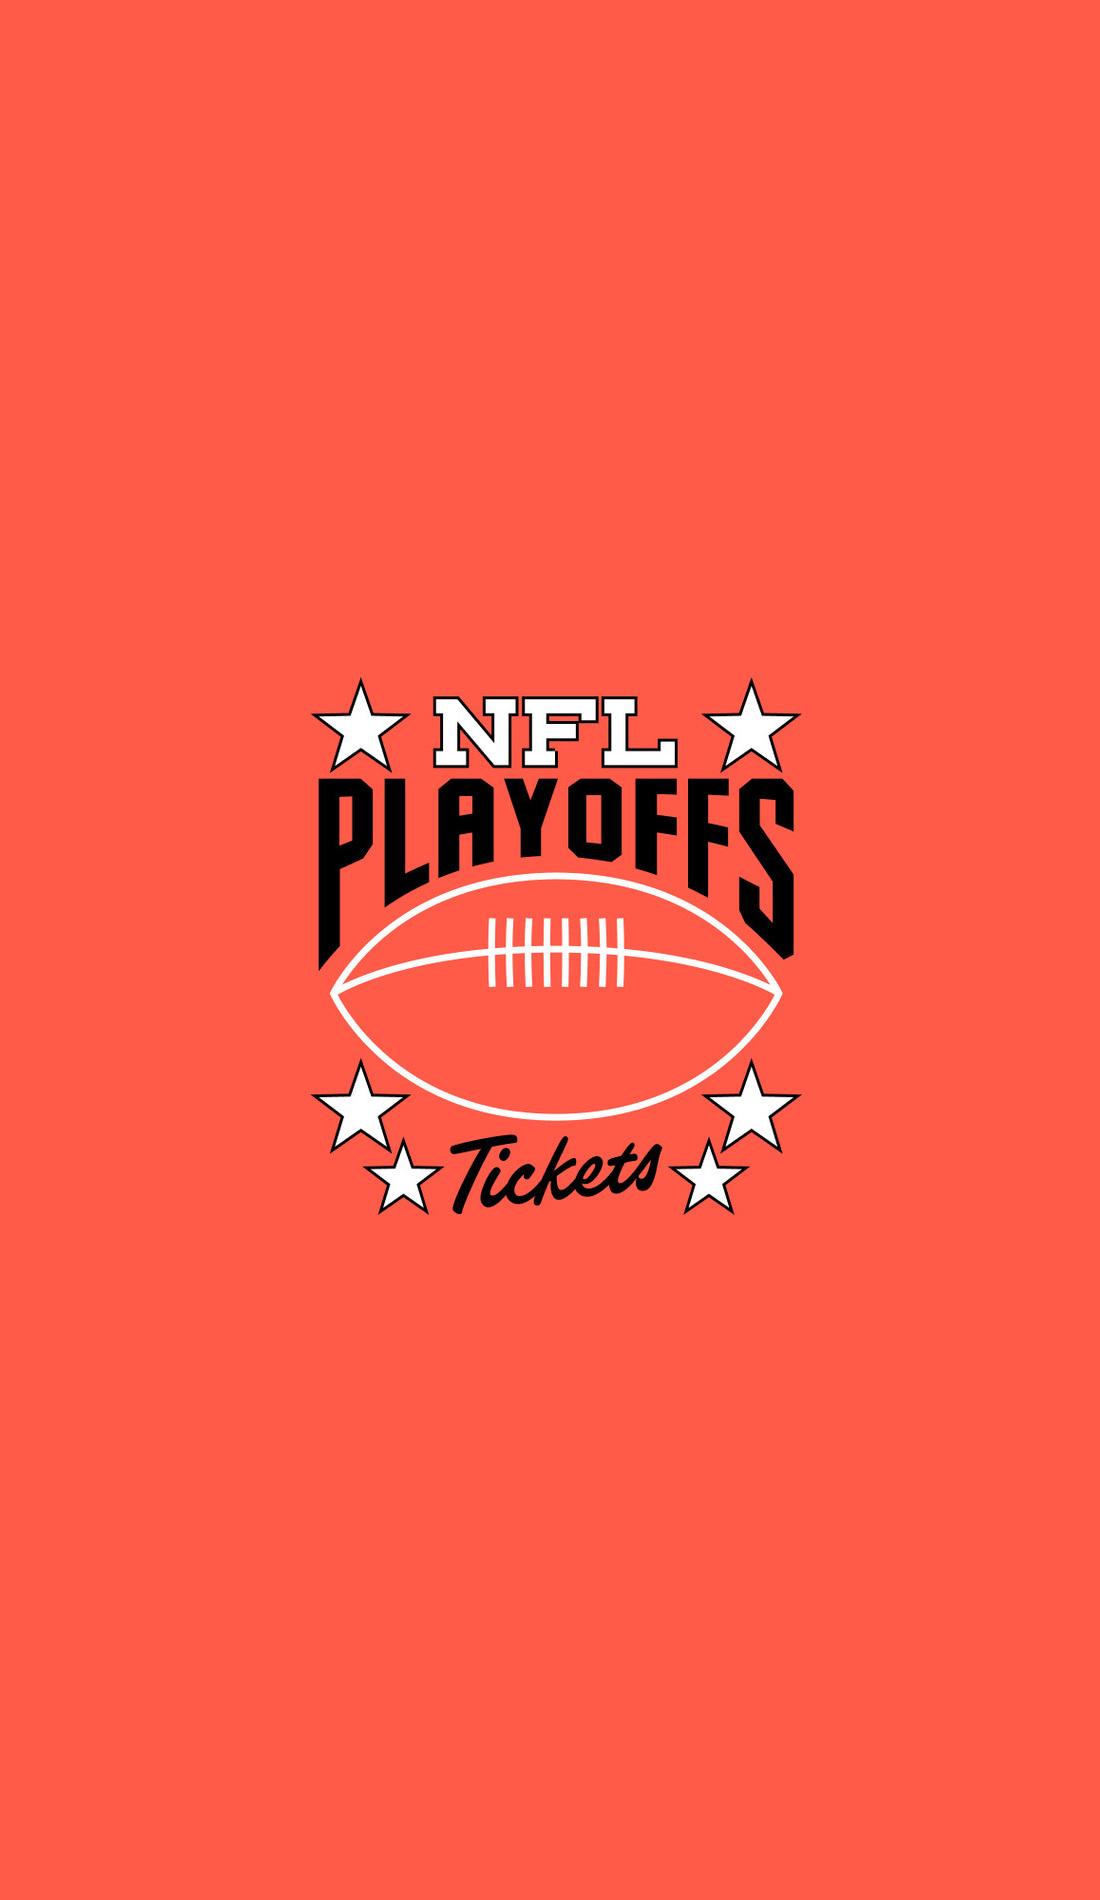 NFL playoffs schedule: TV channel, streaming info for playoff games